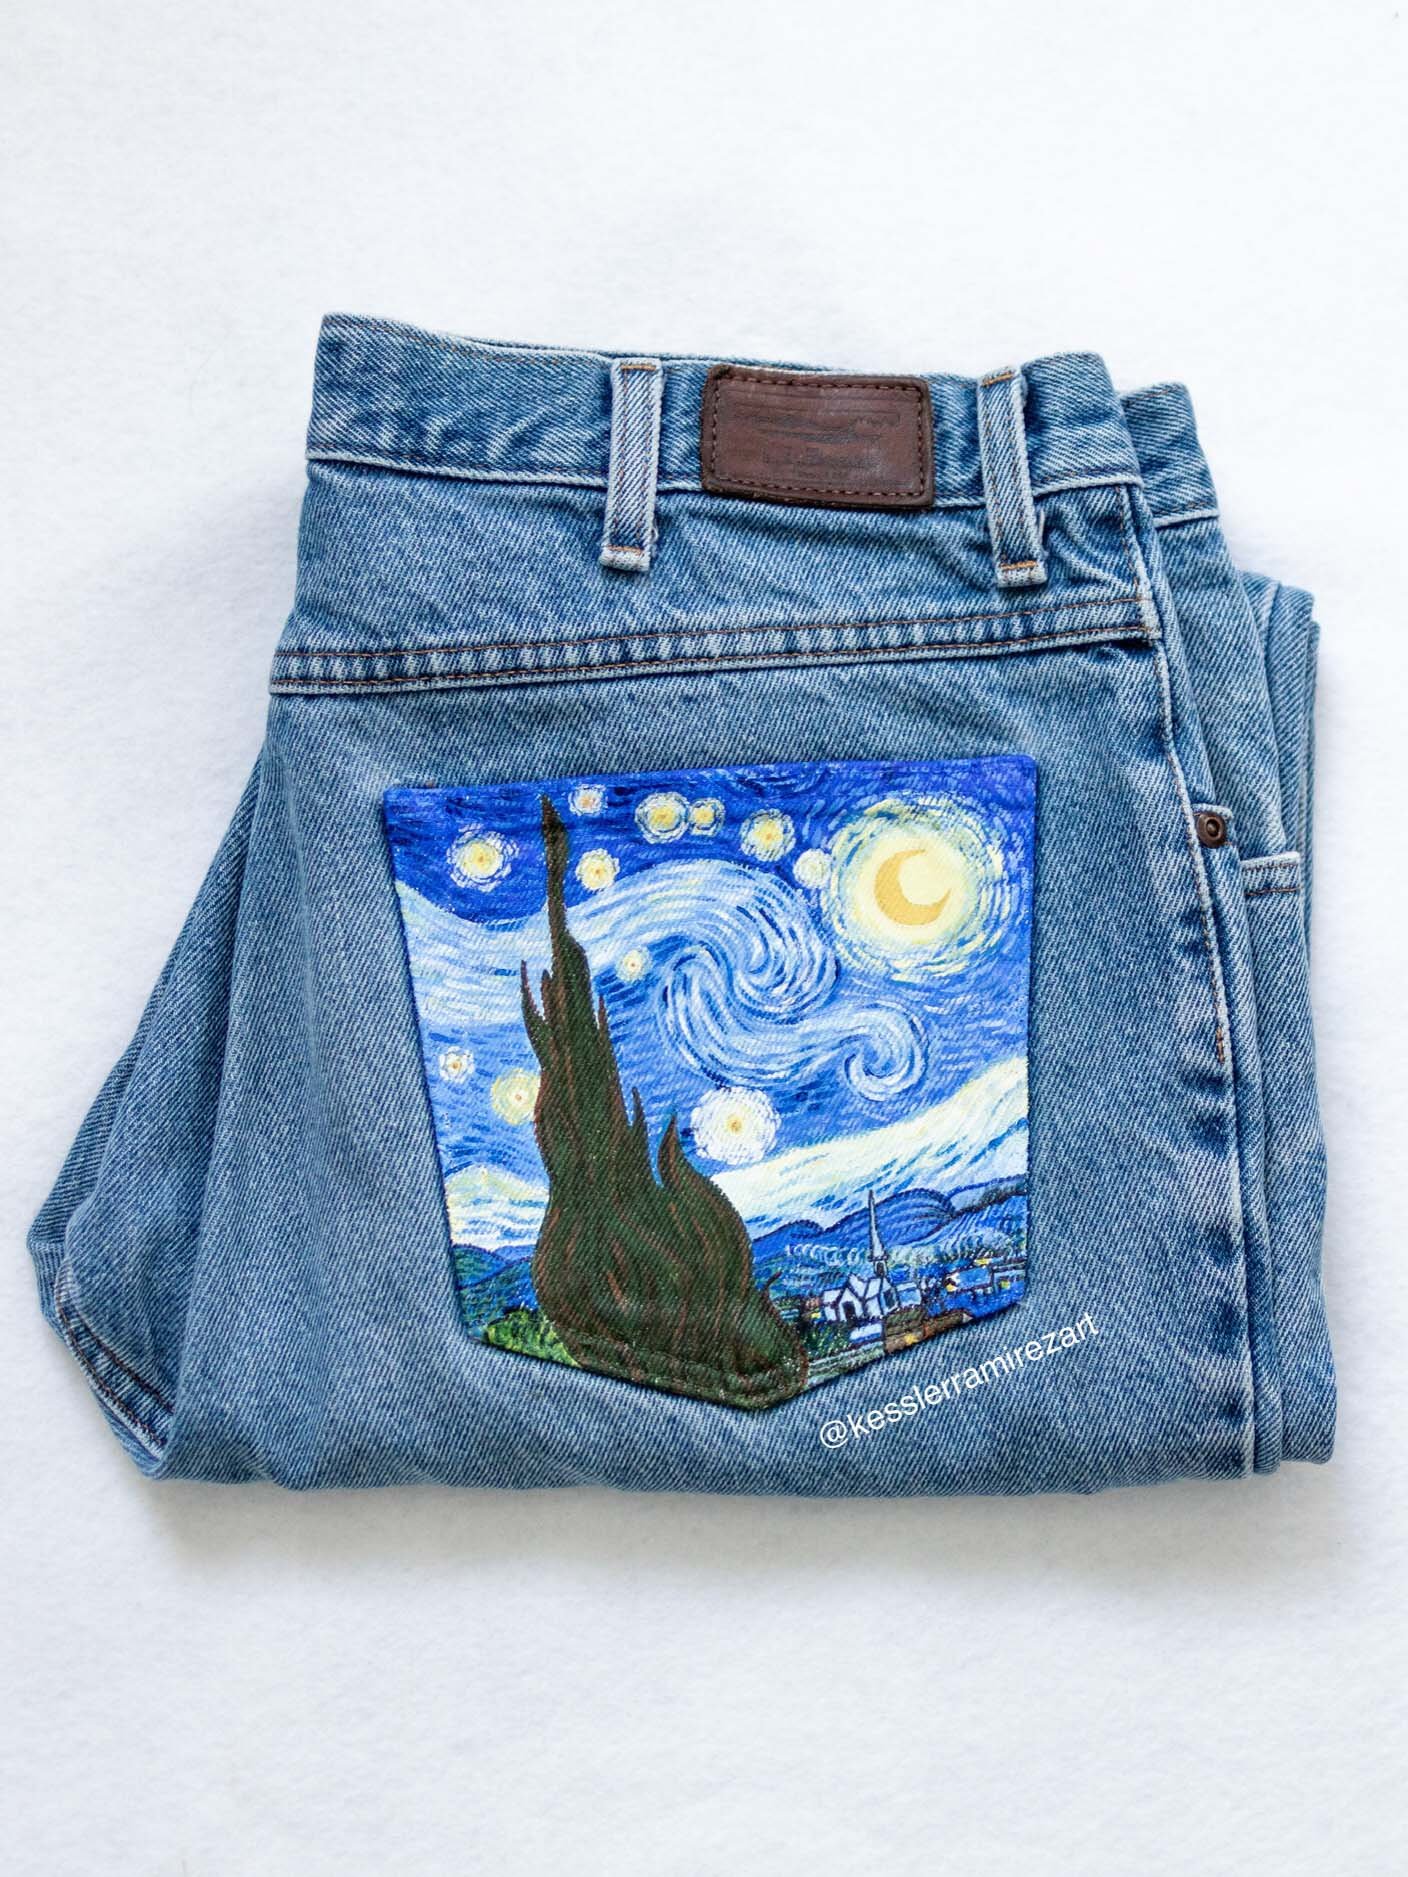 Testing Acrylic & Fabric Paints on Denim - Made By Barb - surprising result